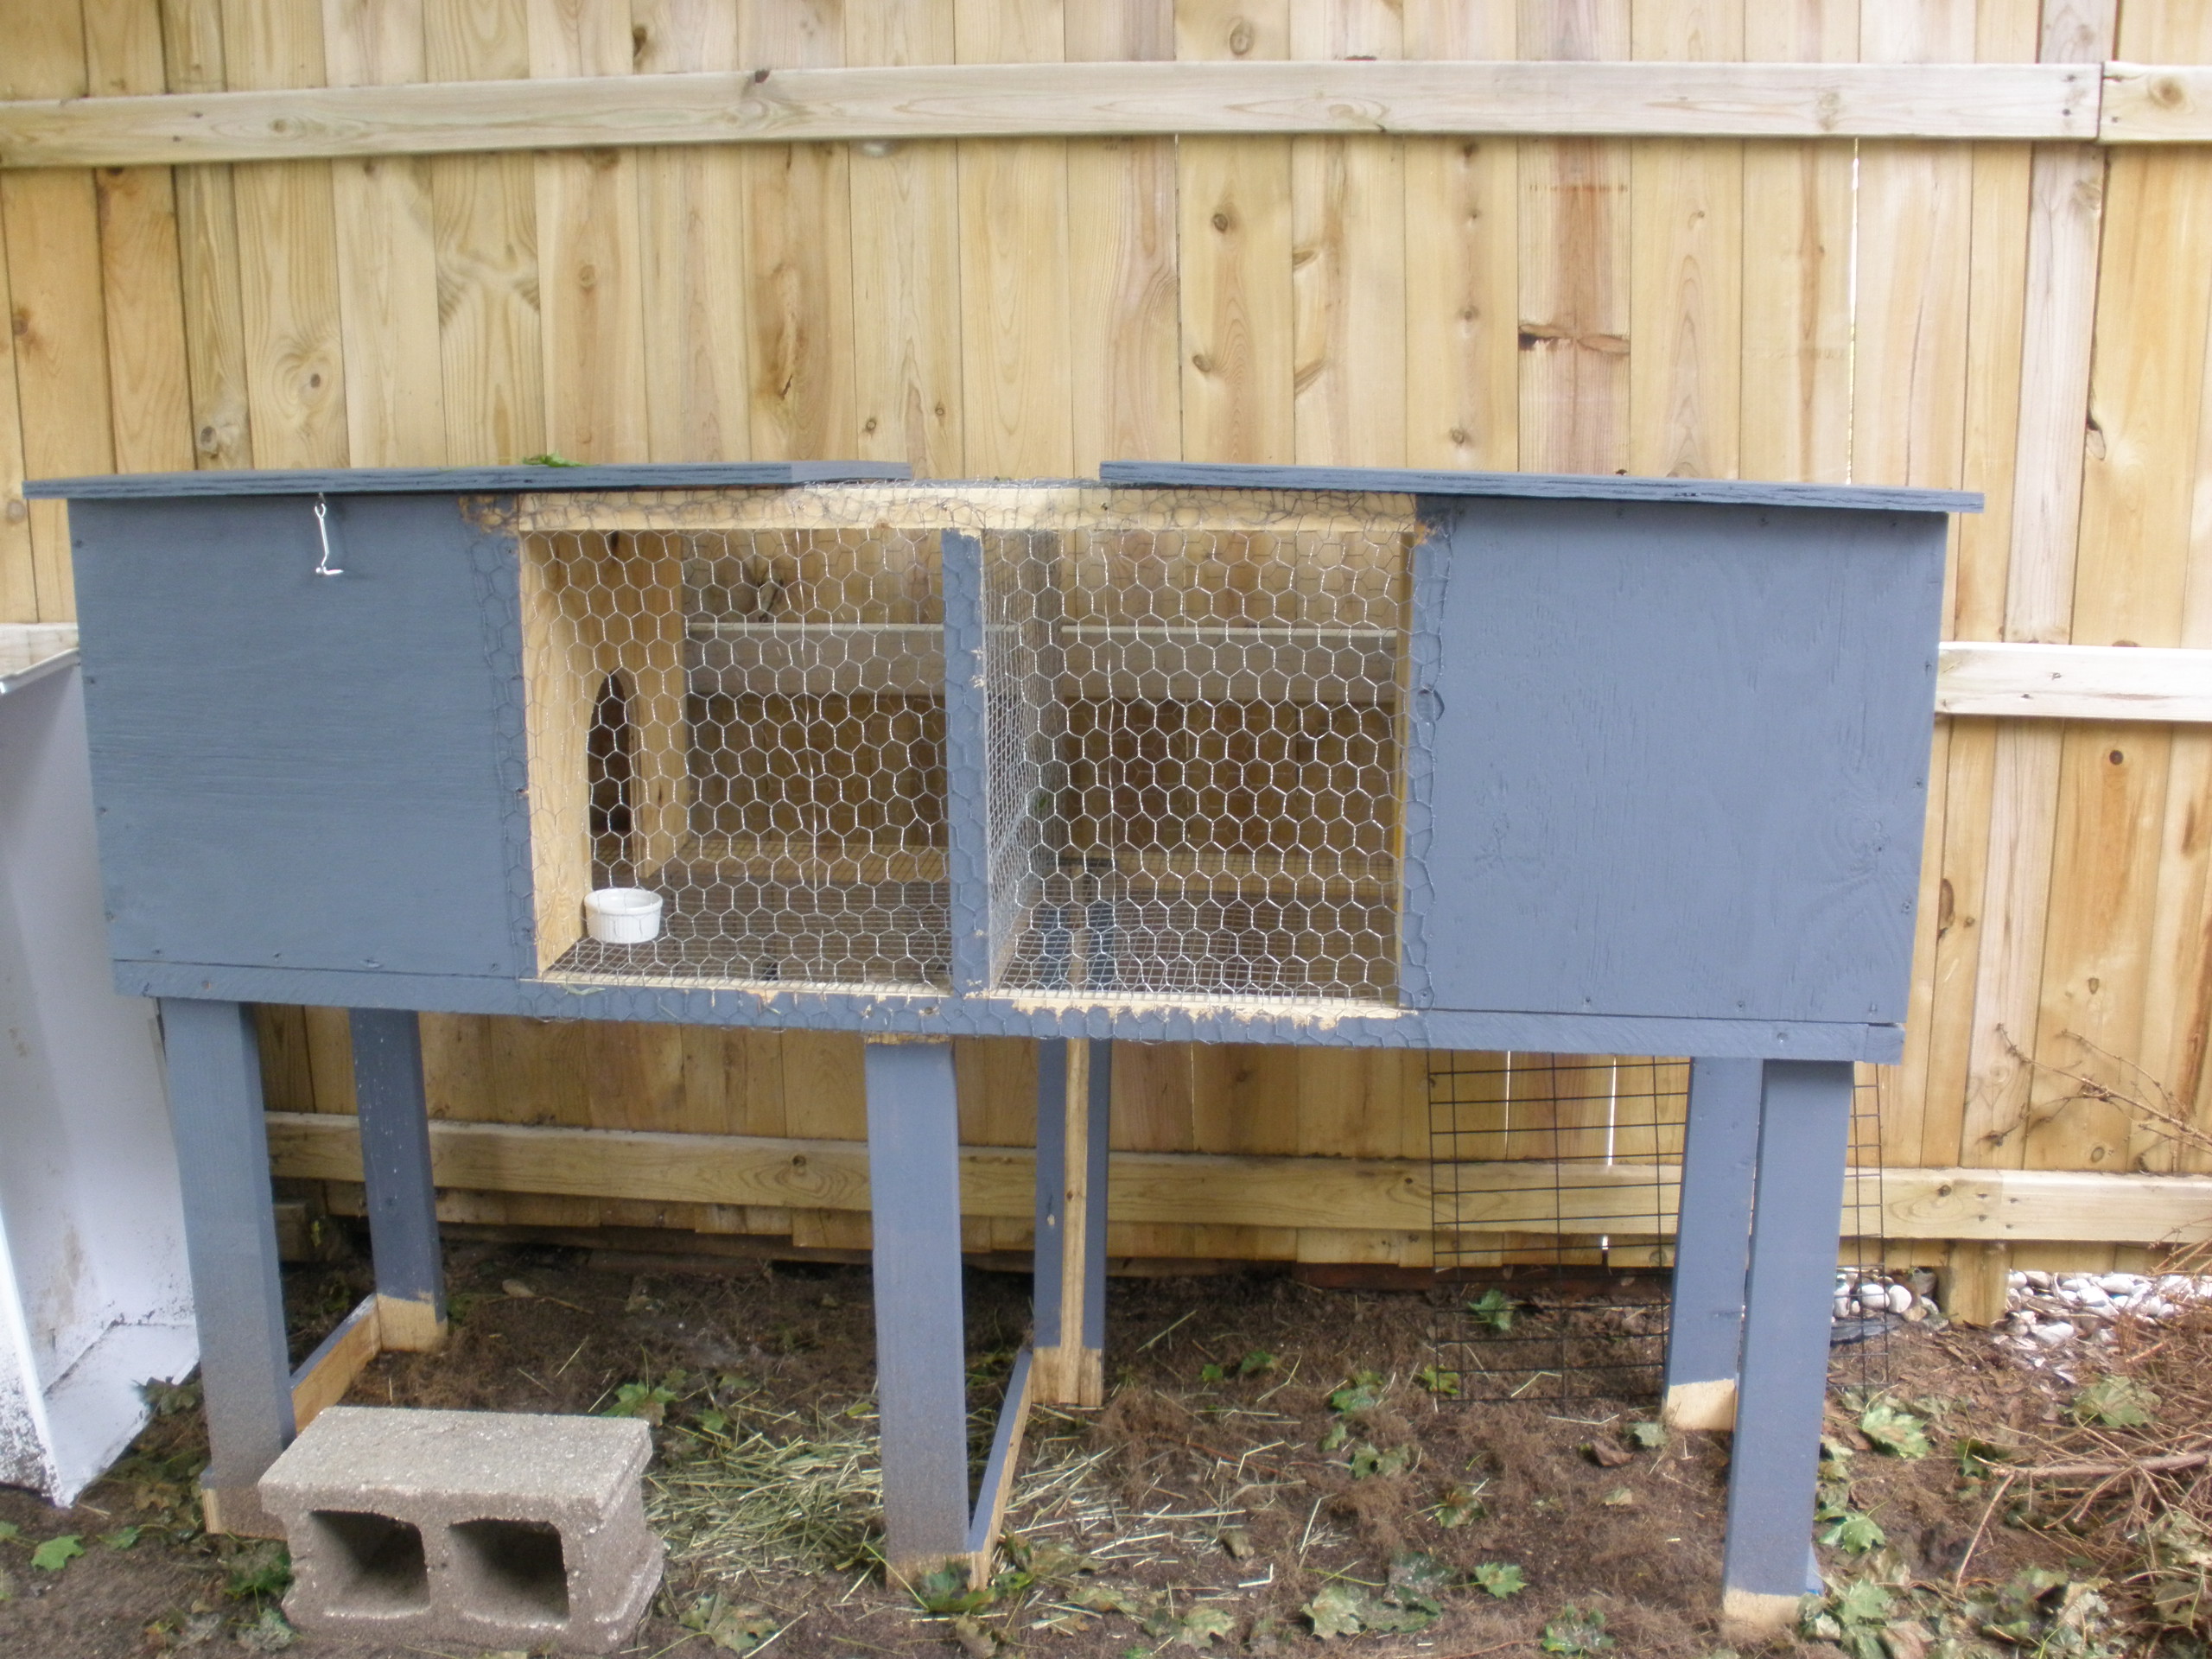 Building a Rabbit Hutch | Notes From a Country Girl Living in the City